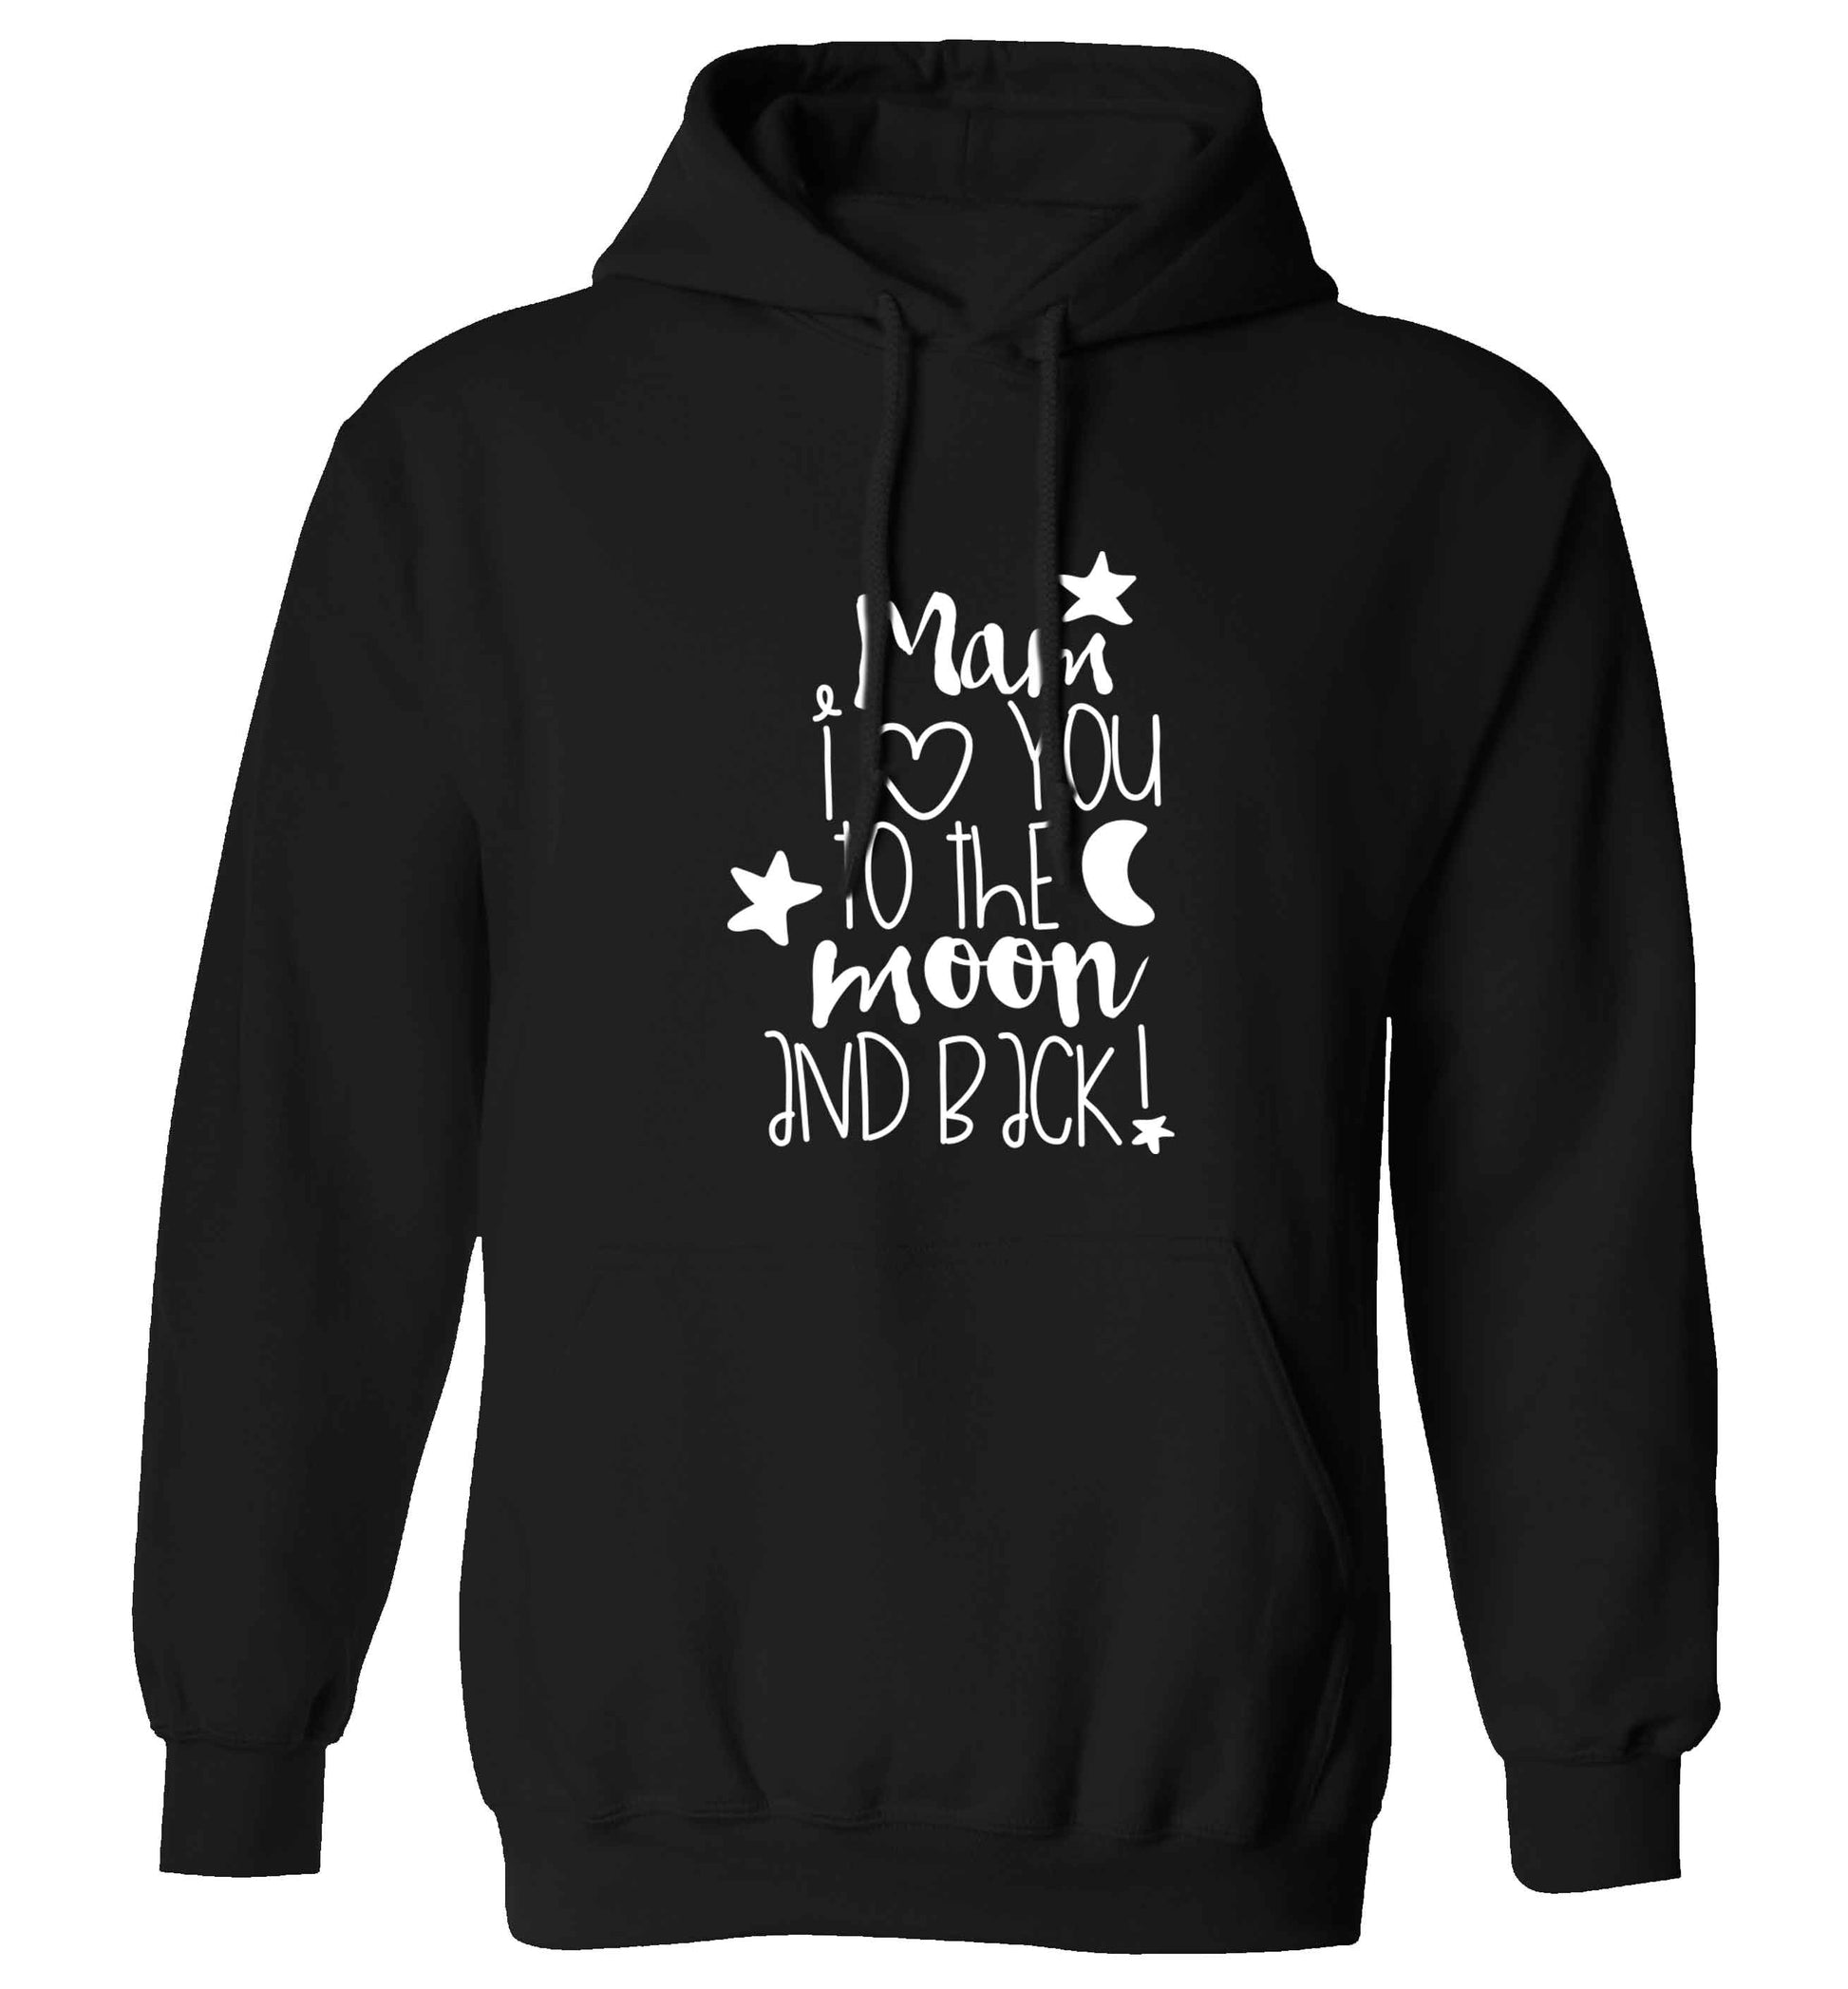 Mam I love you to the moon and back adults unisex black hoodie 2XL